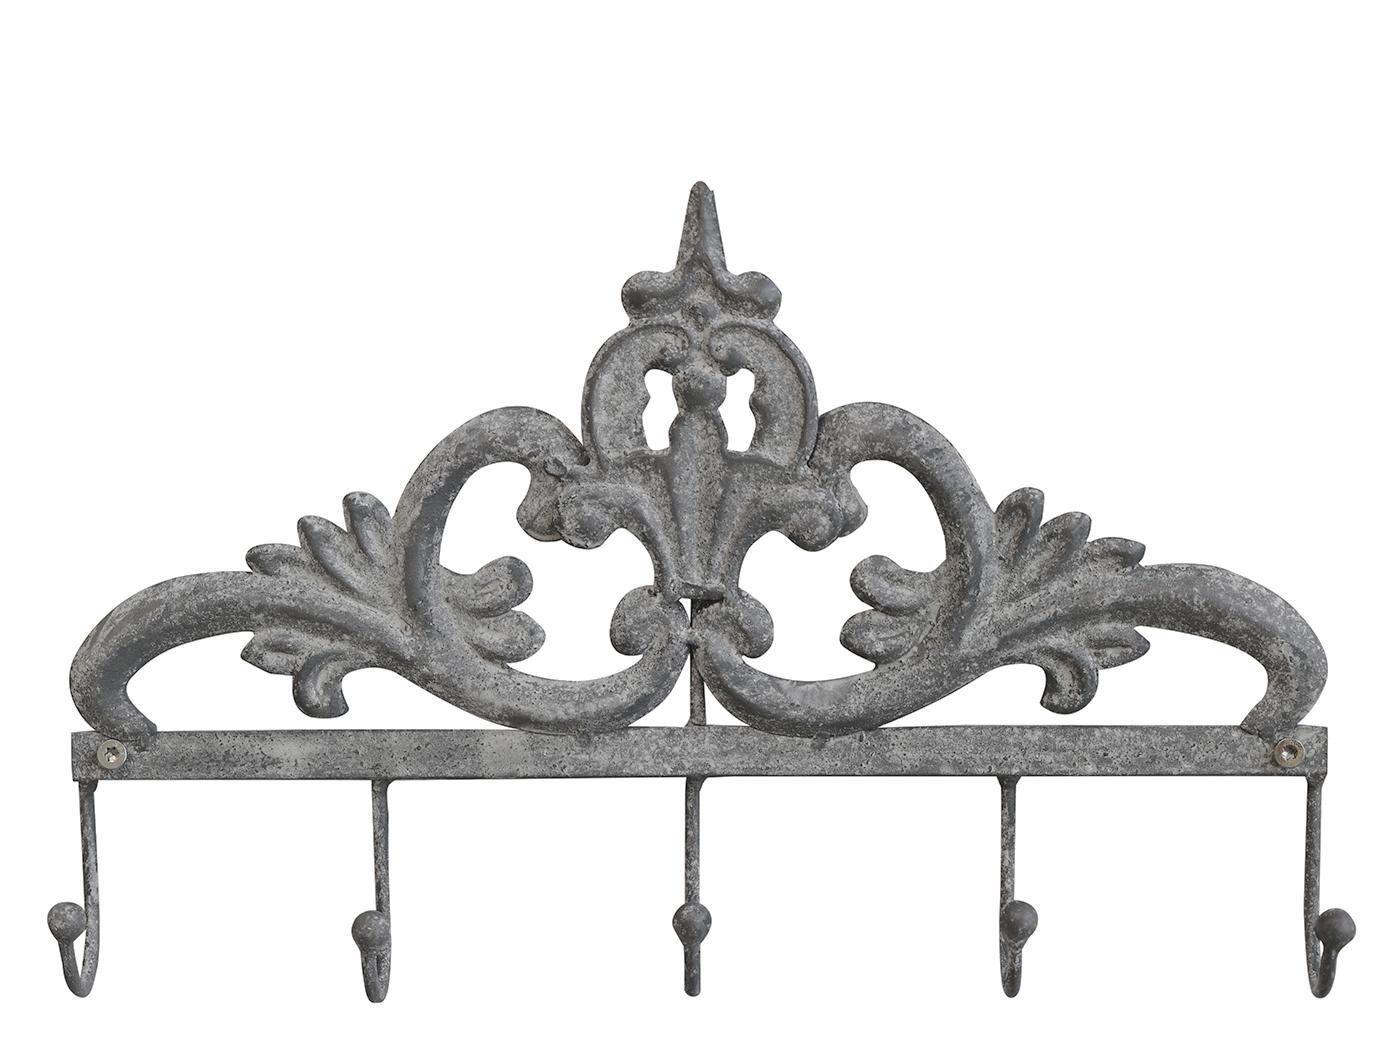 Baxter hooks in antiqued iron for modern farmhouse, country and coastal storage and decor